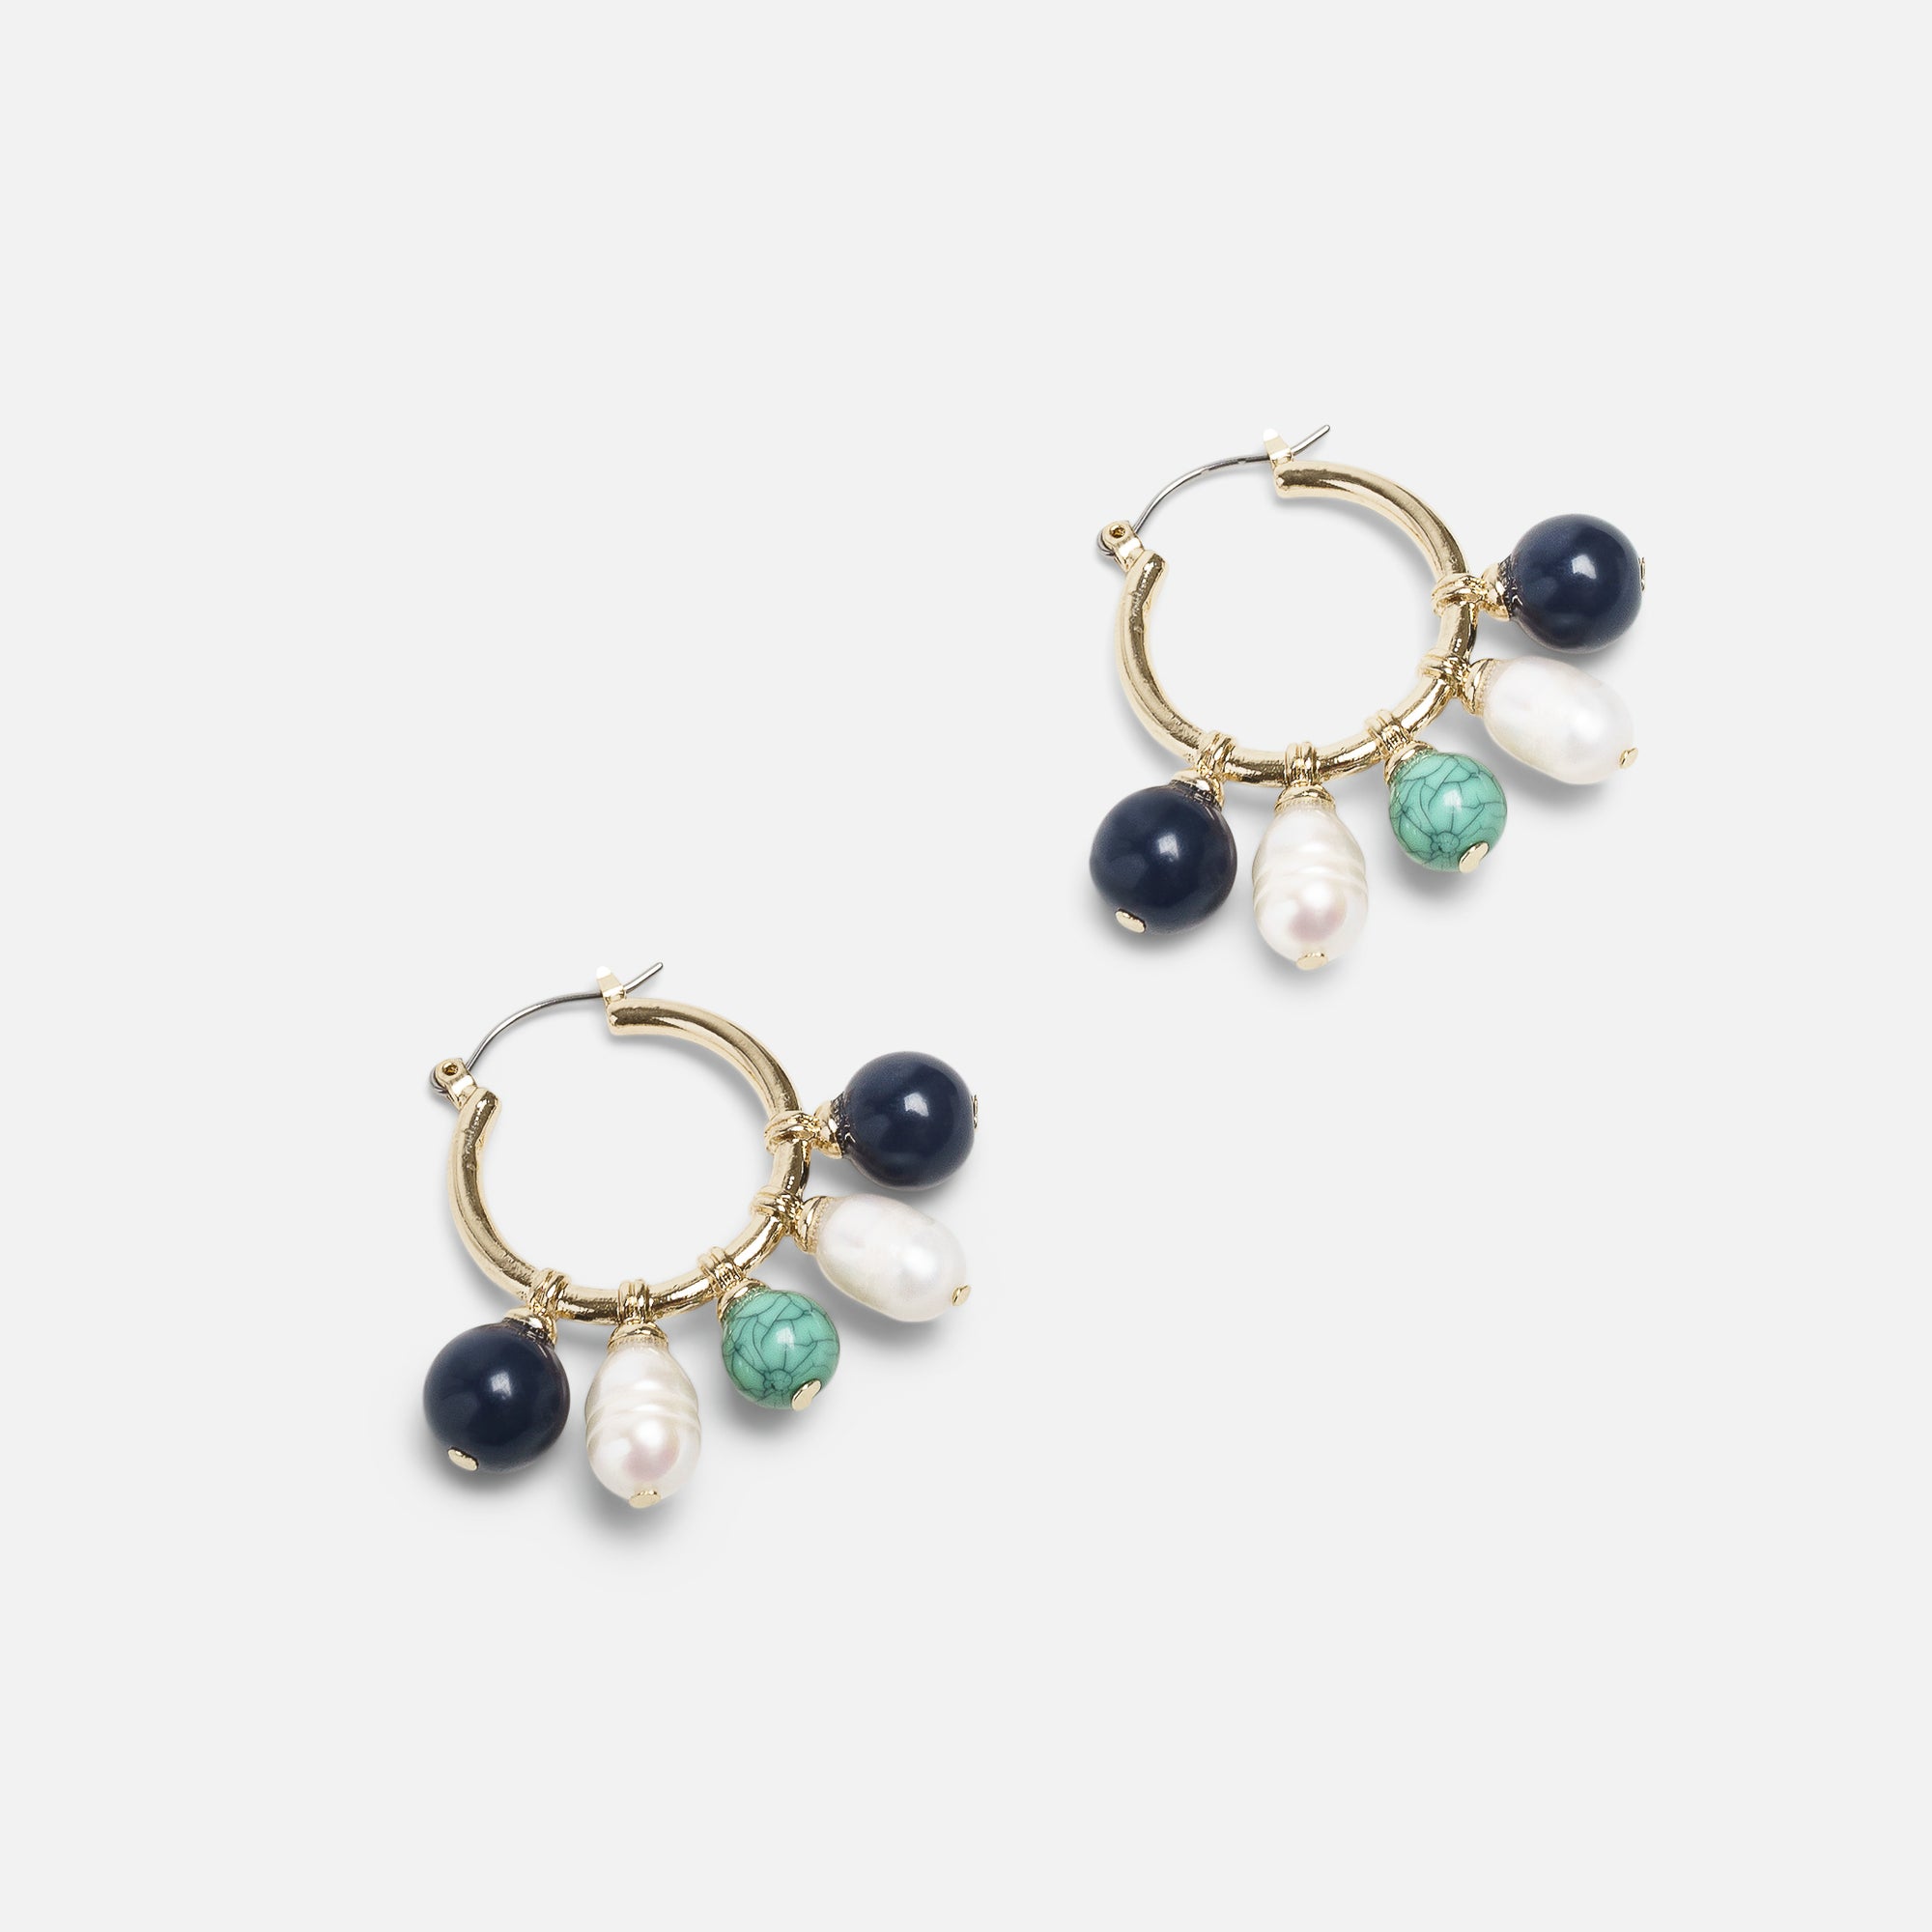 Golden hoop earrings with blue, green and white beads 